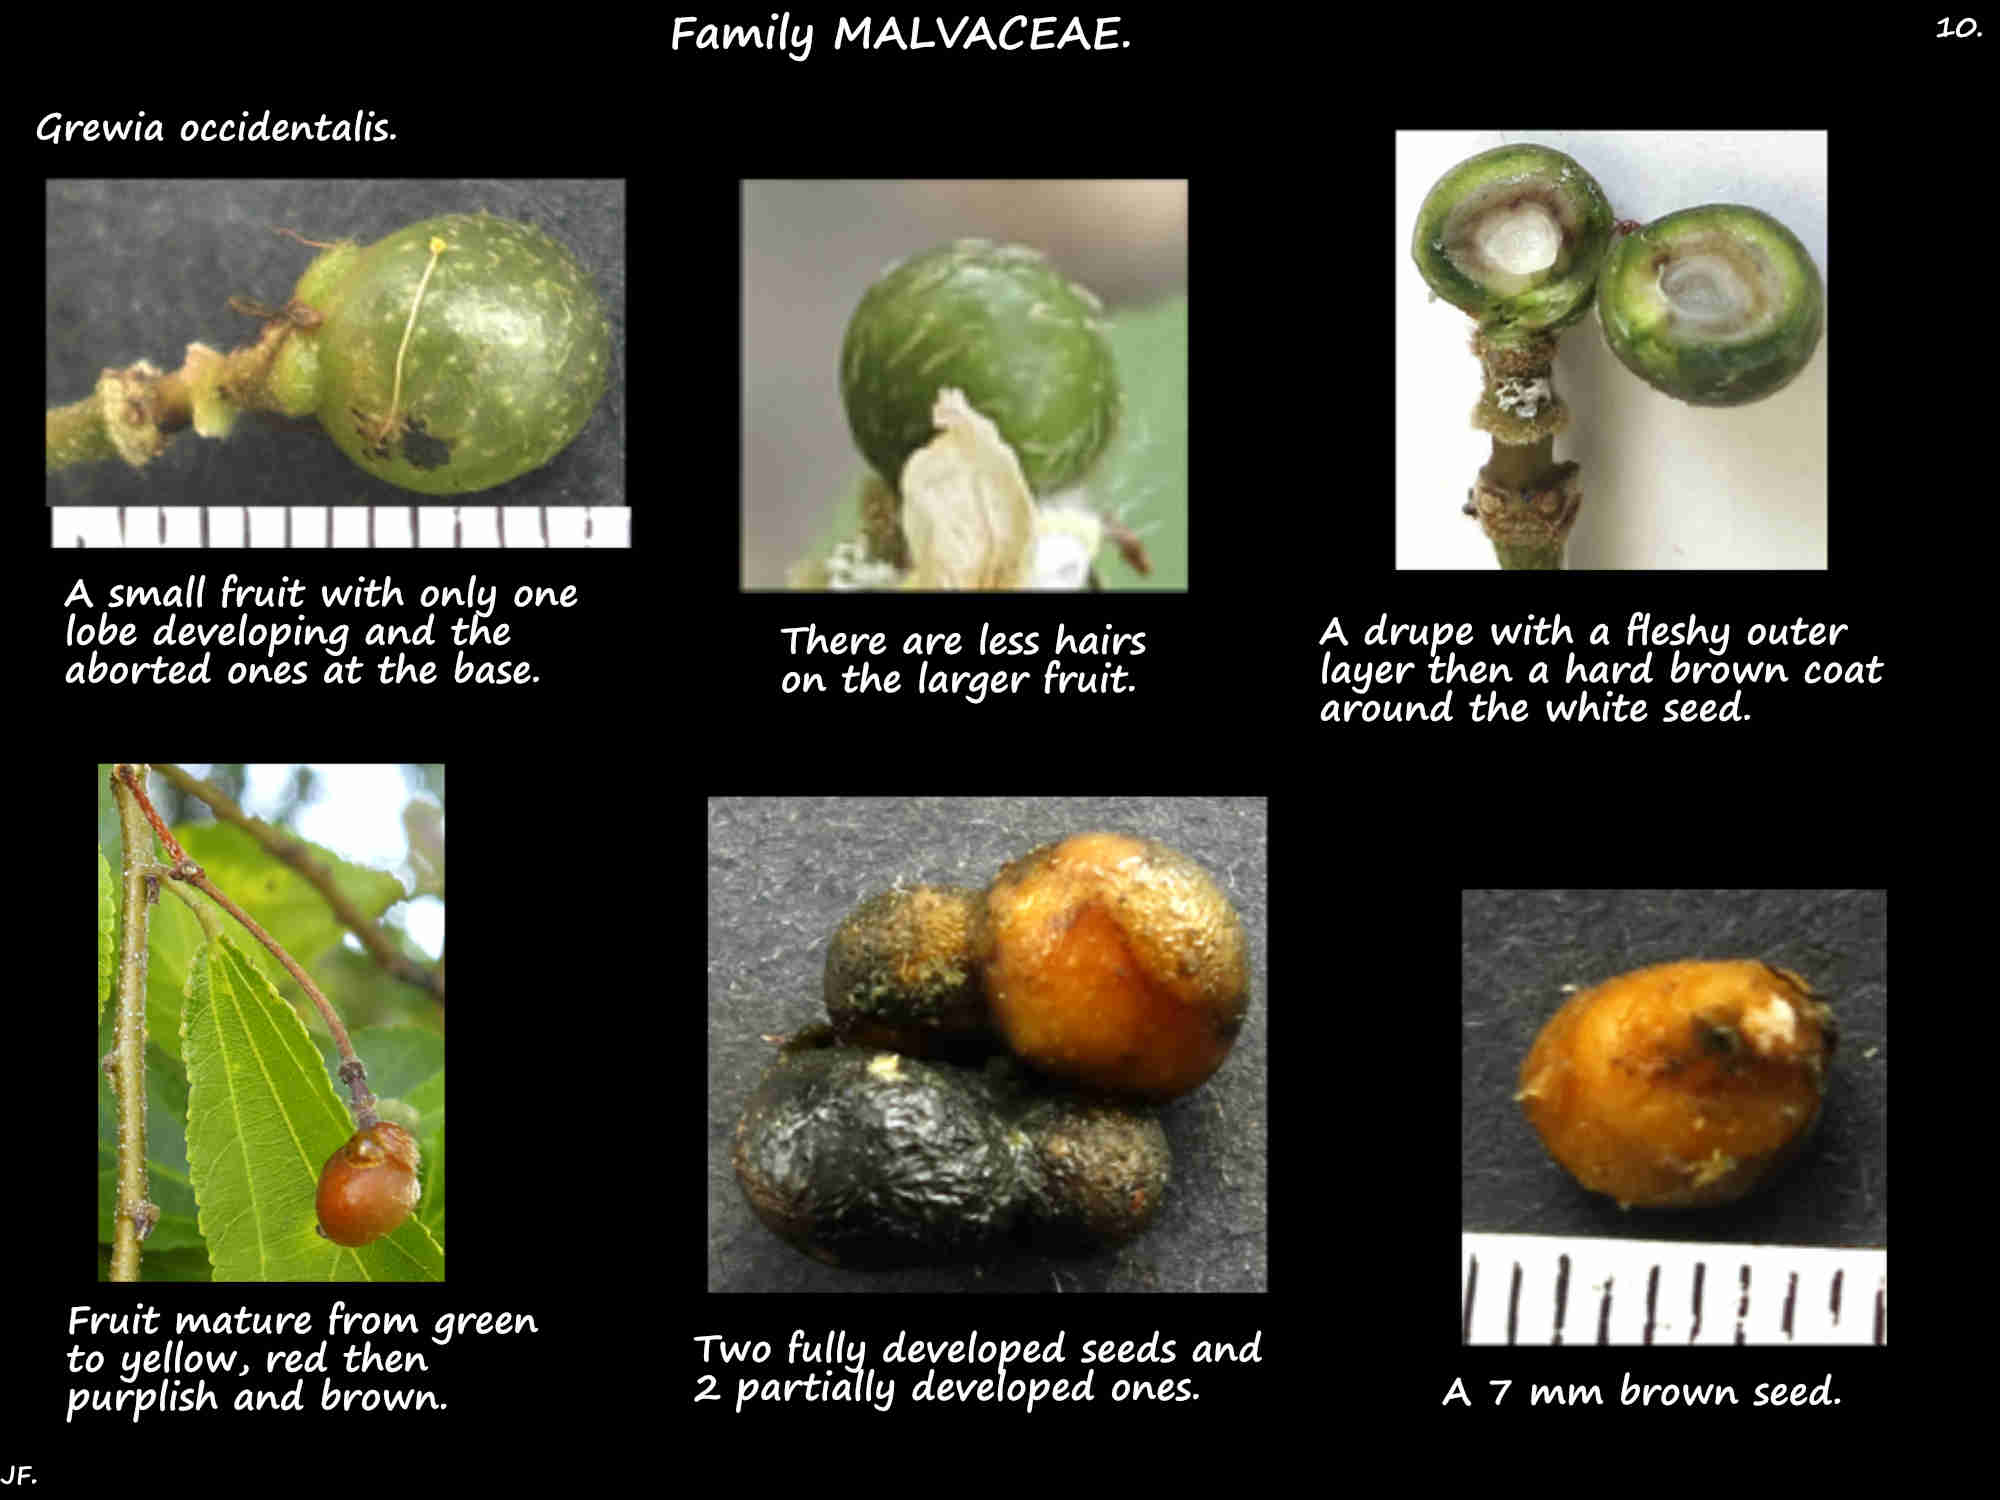 10 The seeds of Grewia occidentalis drupes